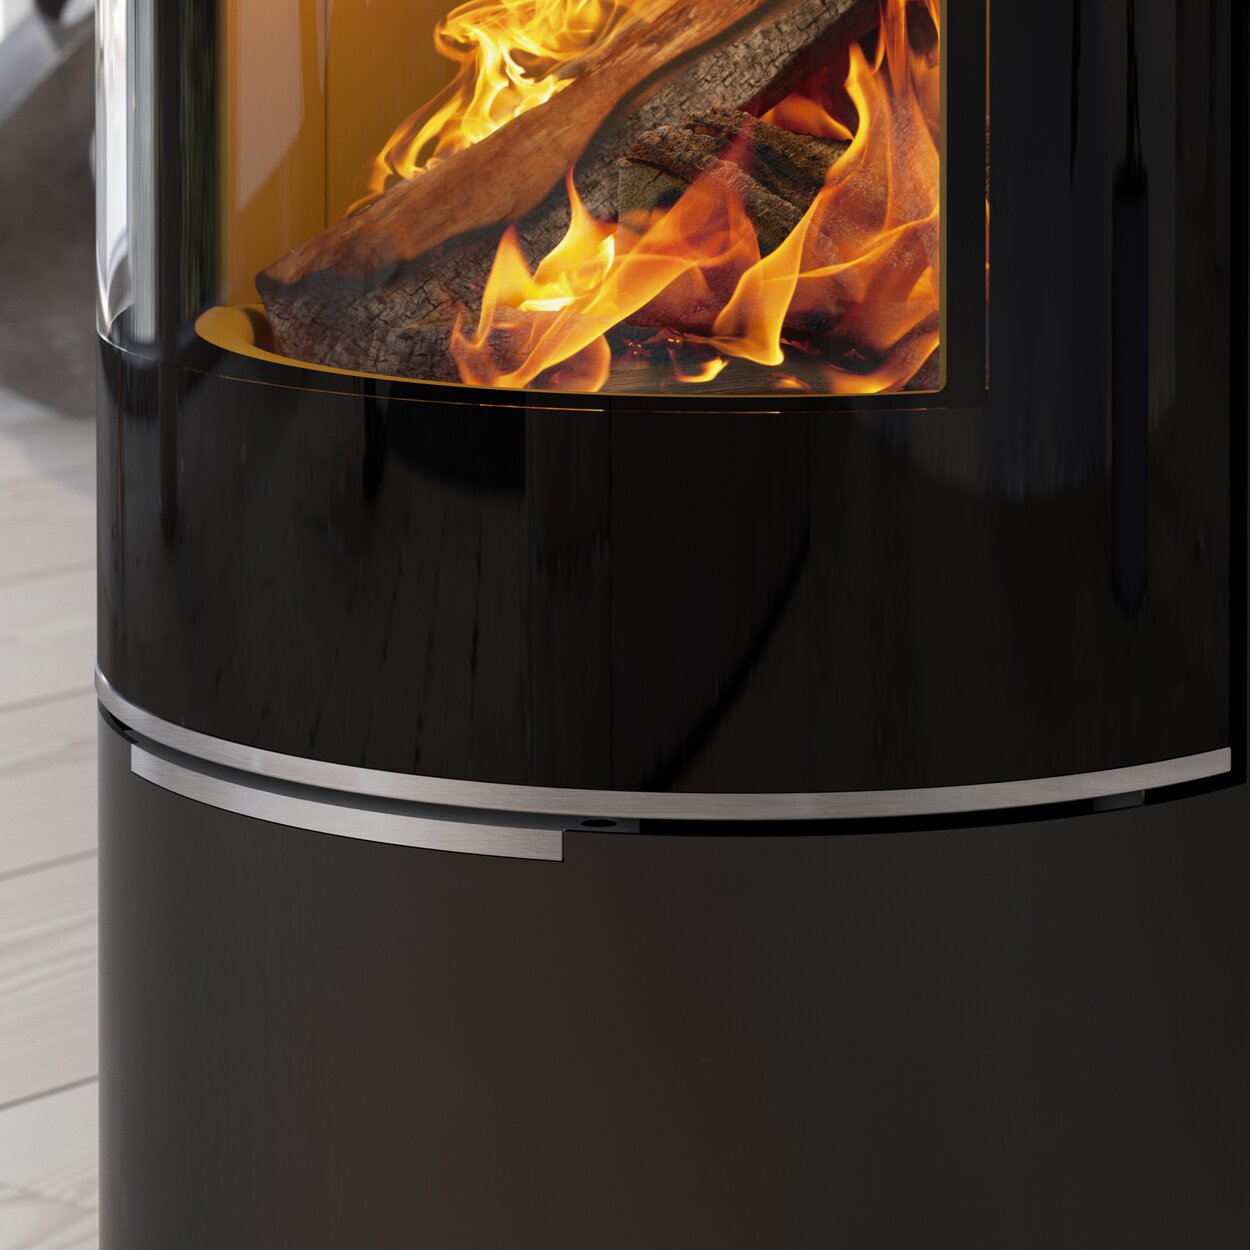 Automatic air control CleverAIR™ from the PILAR wood stove